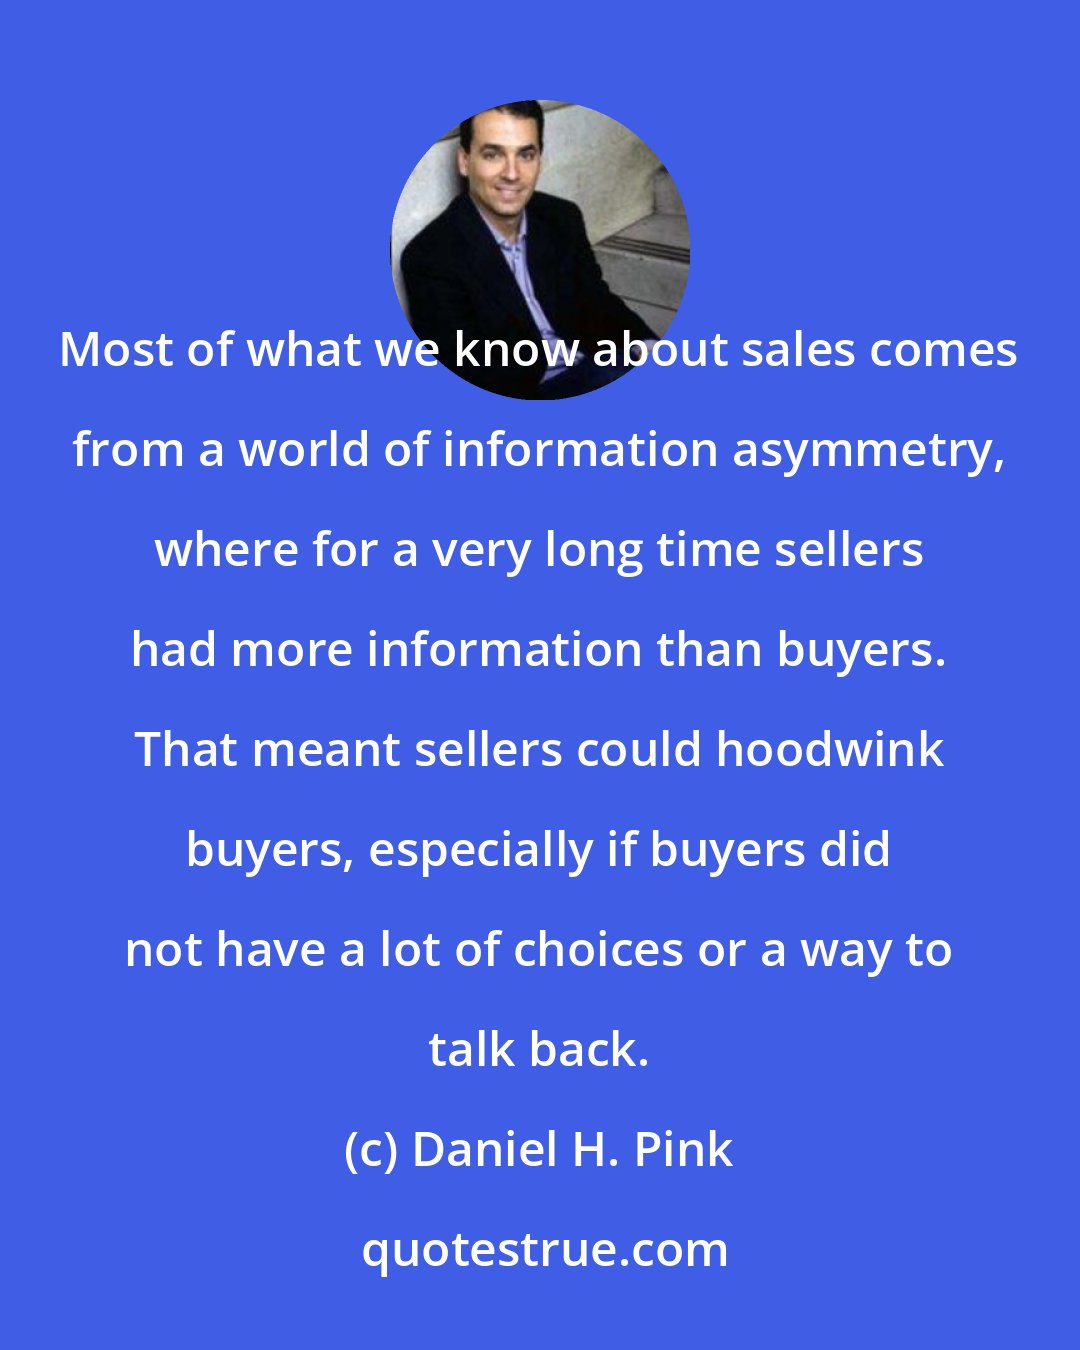 Daniel H. Pink: Most of what we know about sales comes from a world of information asymmetry, where for a very long time sellers had more information than buyers. That meant sellers could hoodwink buyers, especially if buyers did not have a lot of choices or a way to talk back.